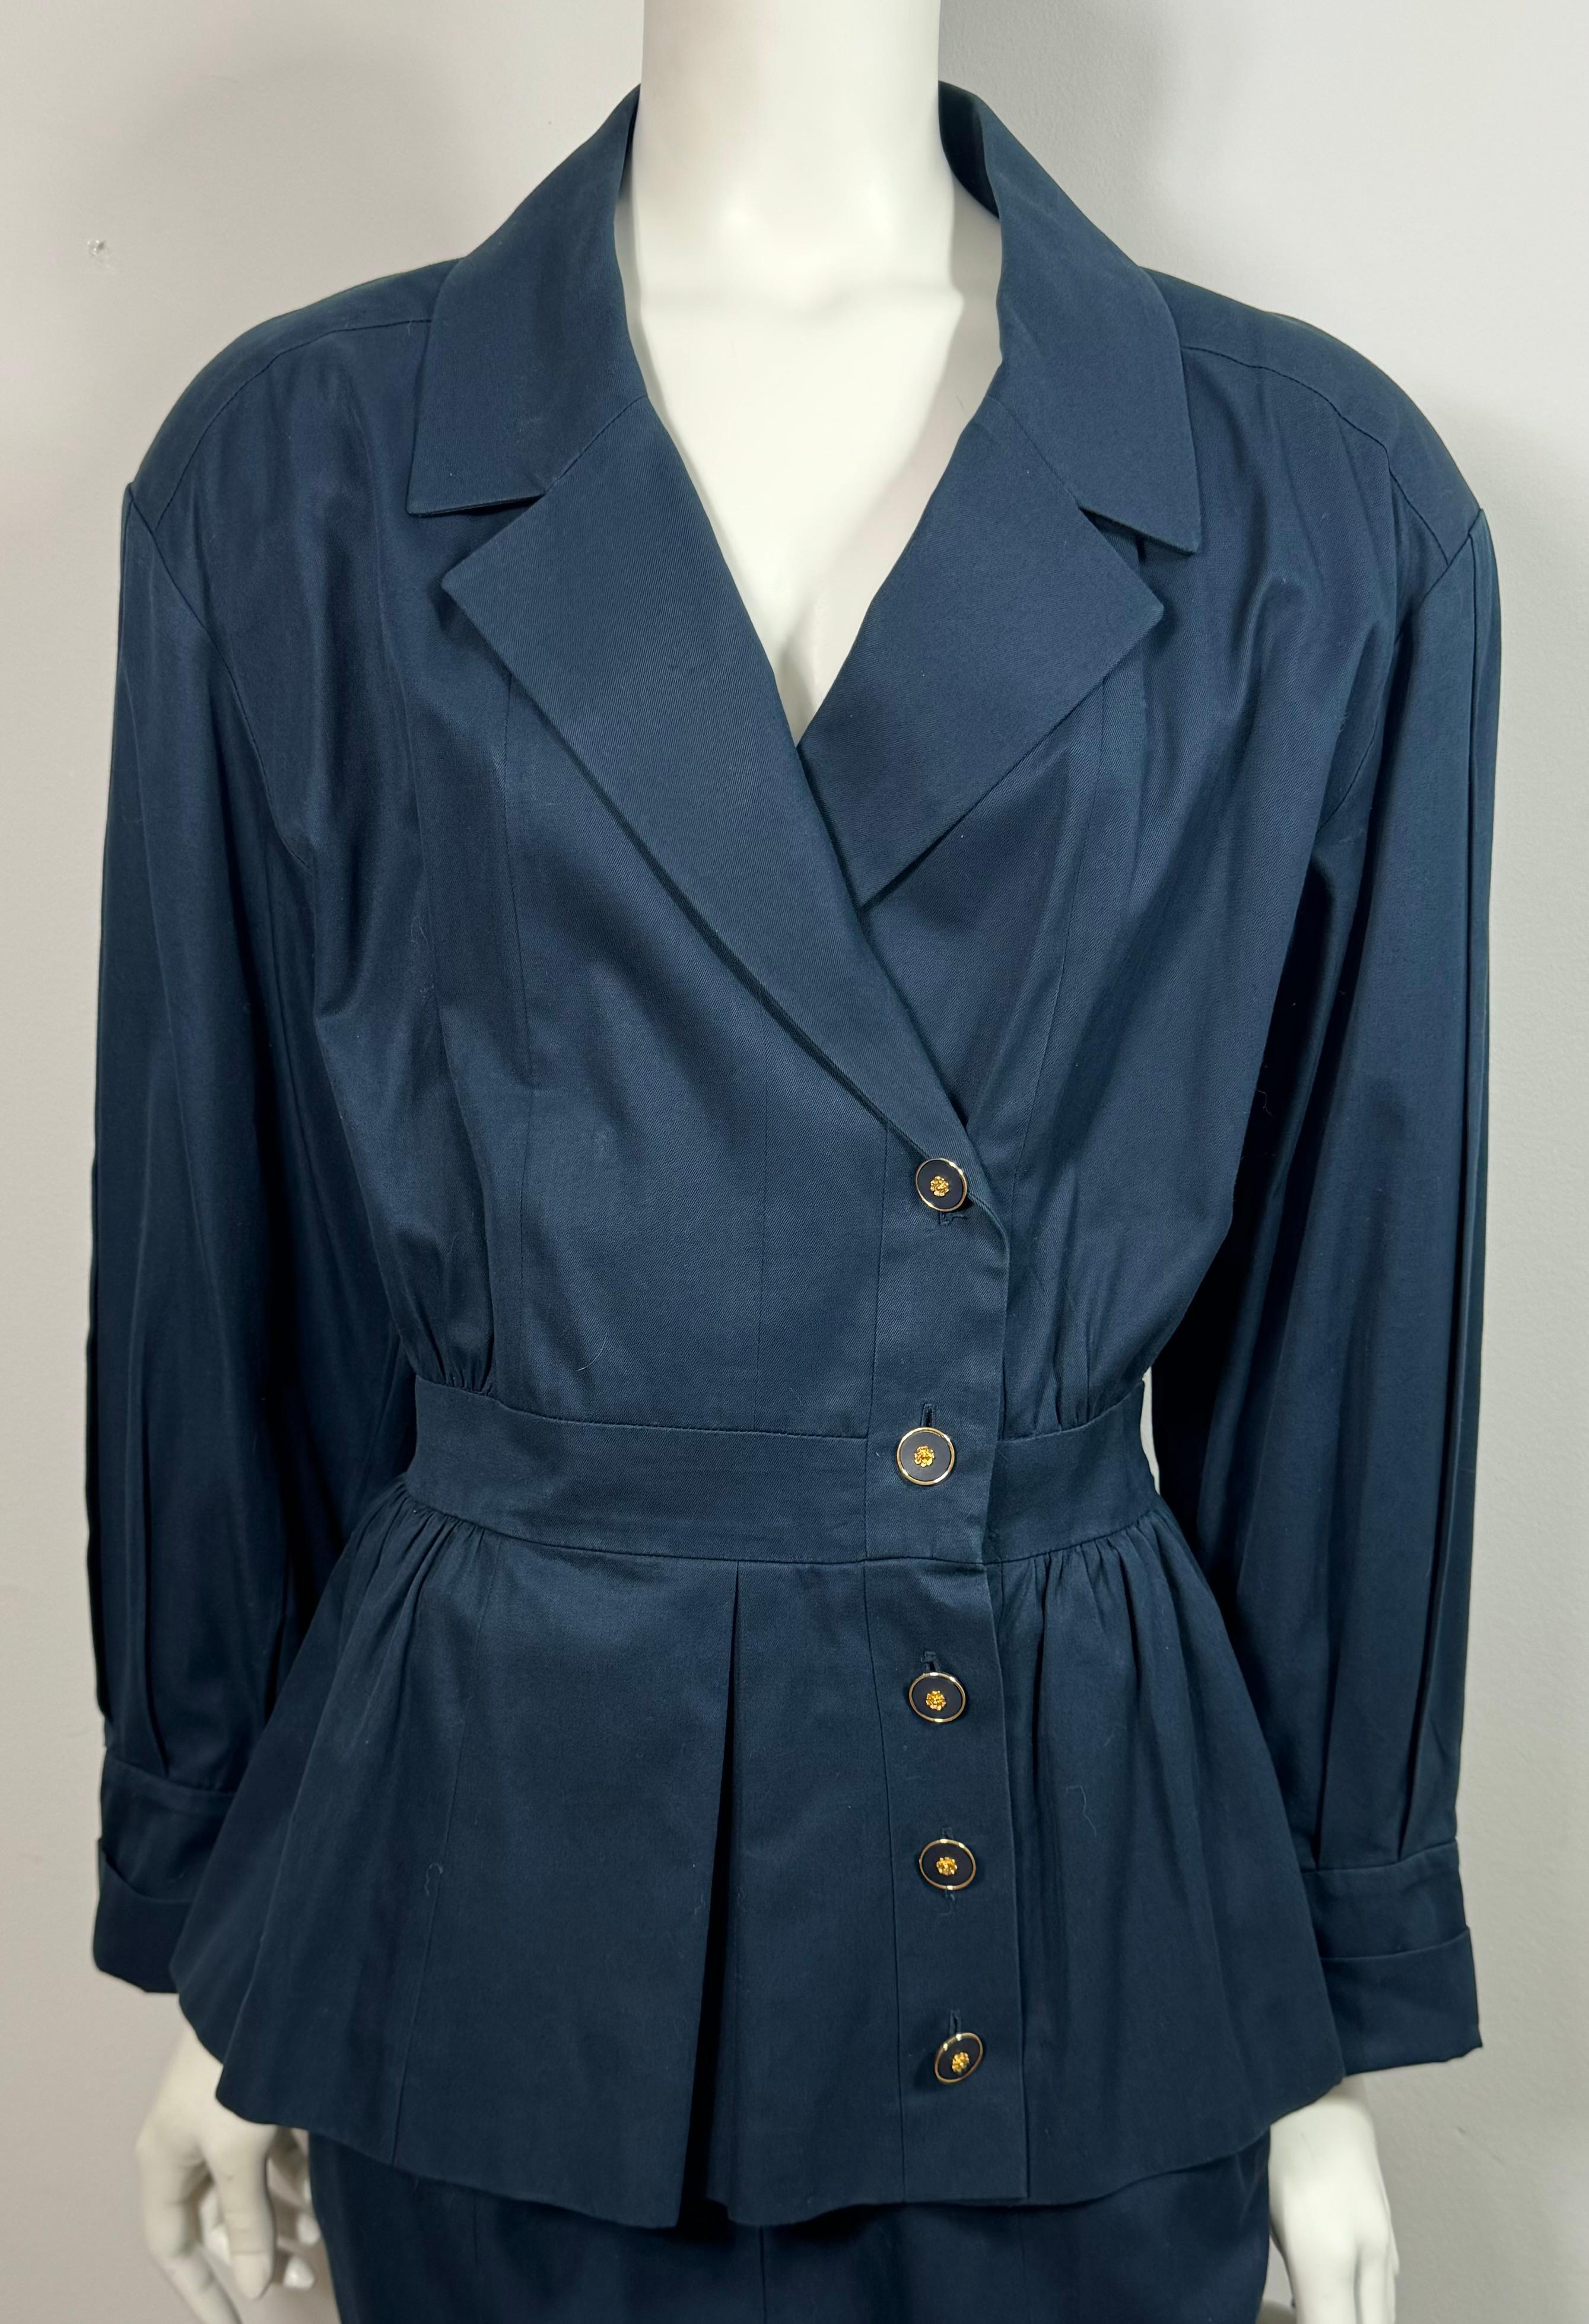 Chanel 1980's Navy Cotton Cinched Waist Jacket Skirt Suit - Size 38 For Sale 1